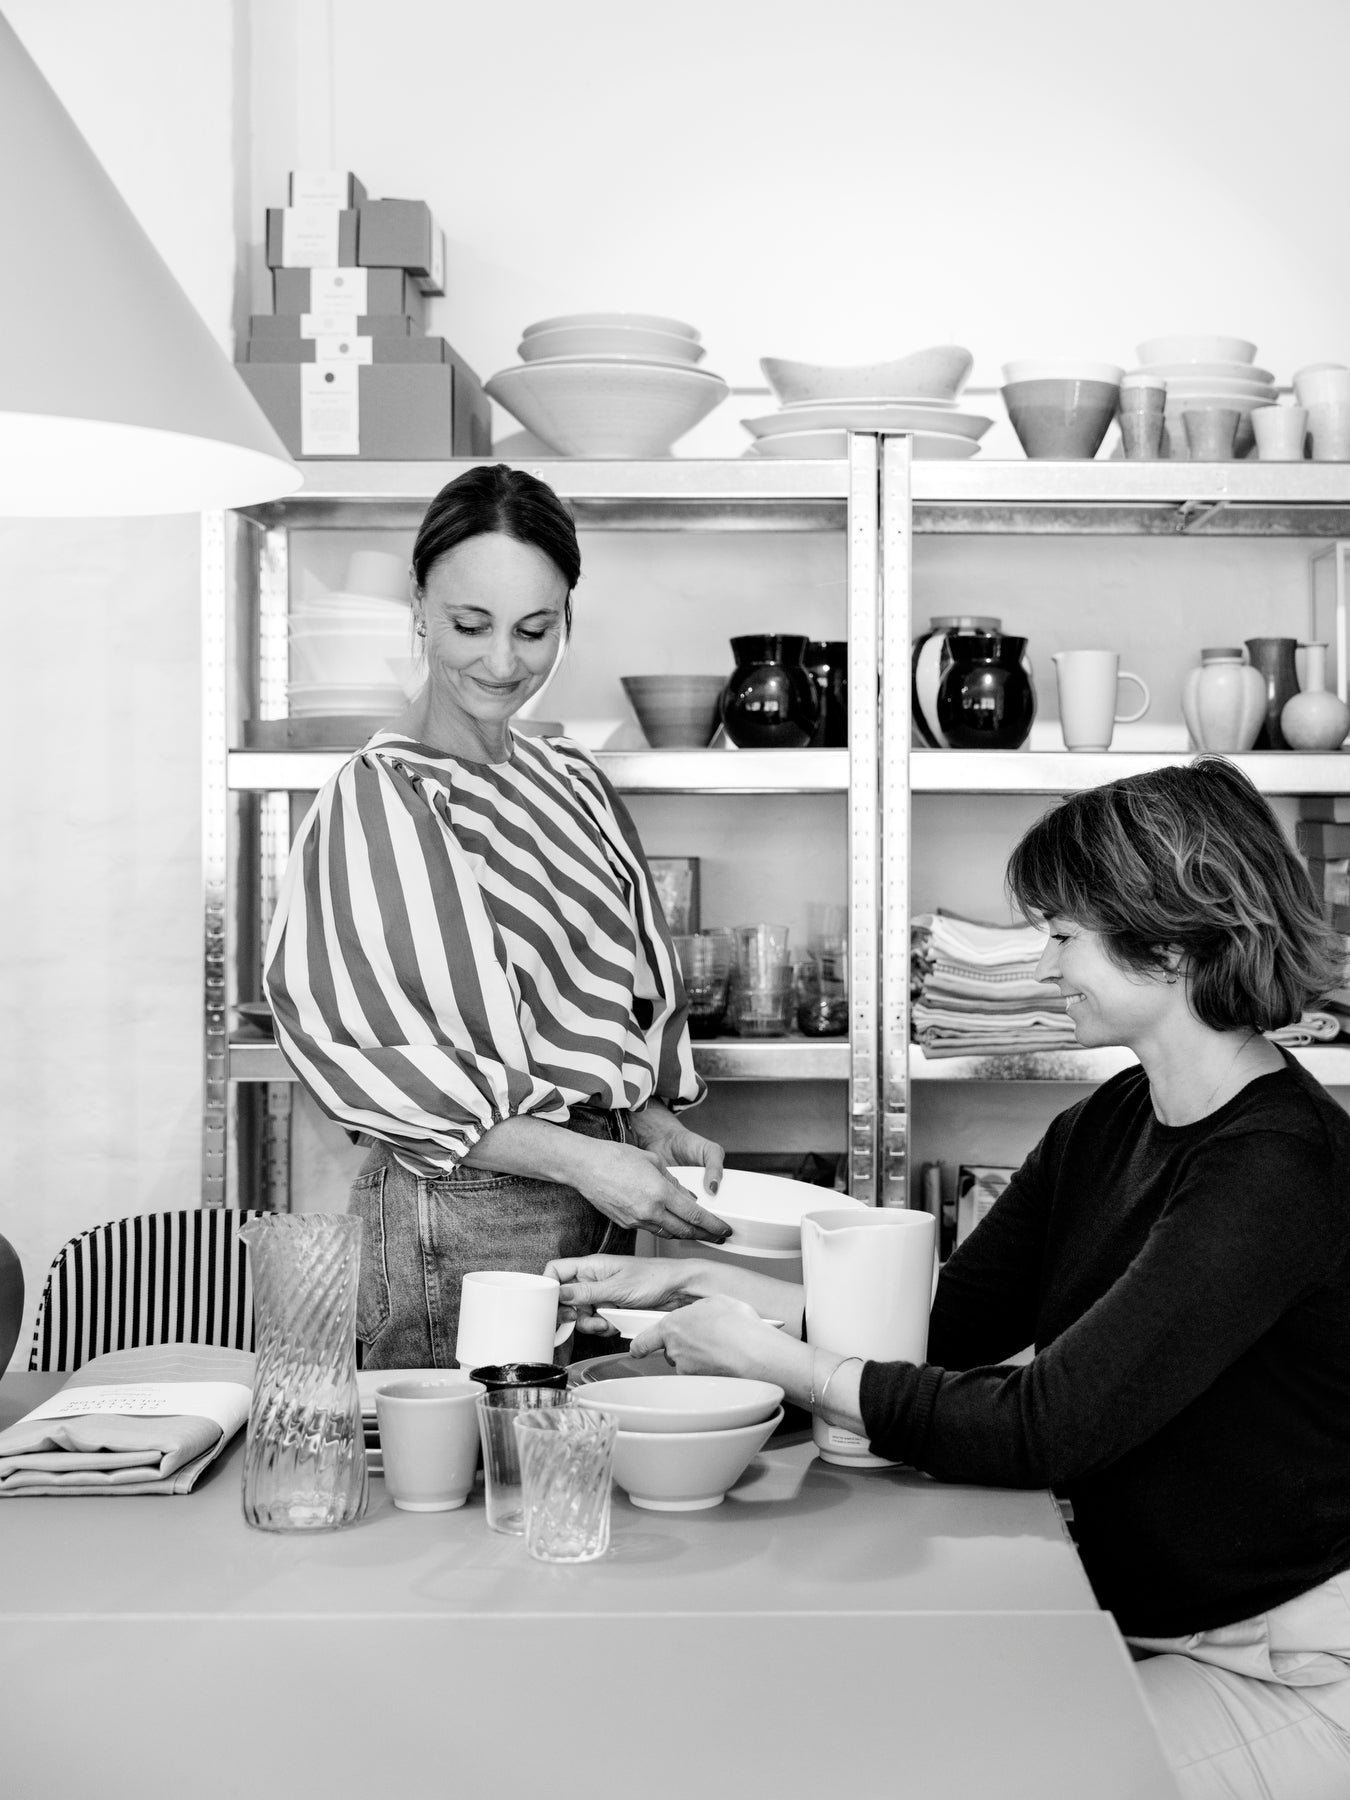 Stilleben co-founders and designers Ditte Reckweg (left) and Jelena Schou Nordentoft (right) in the office space with Memphis Stoneware